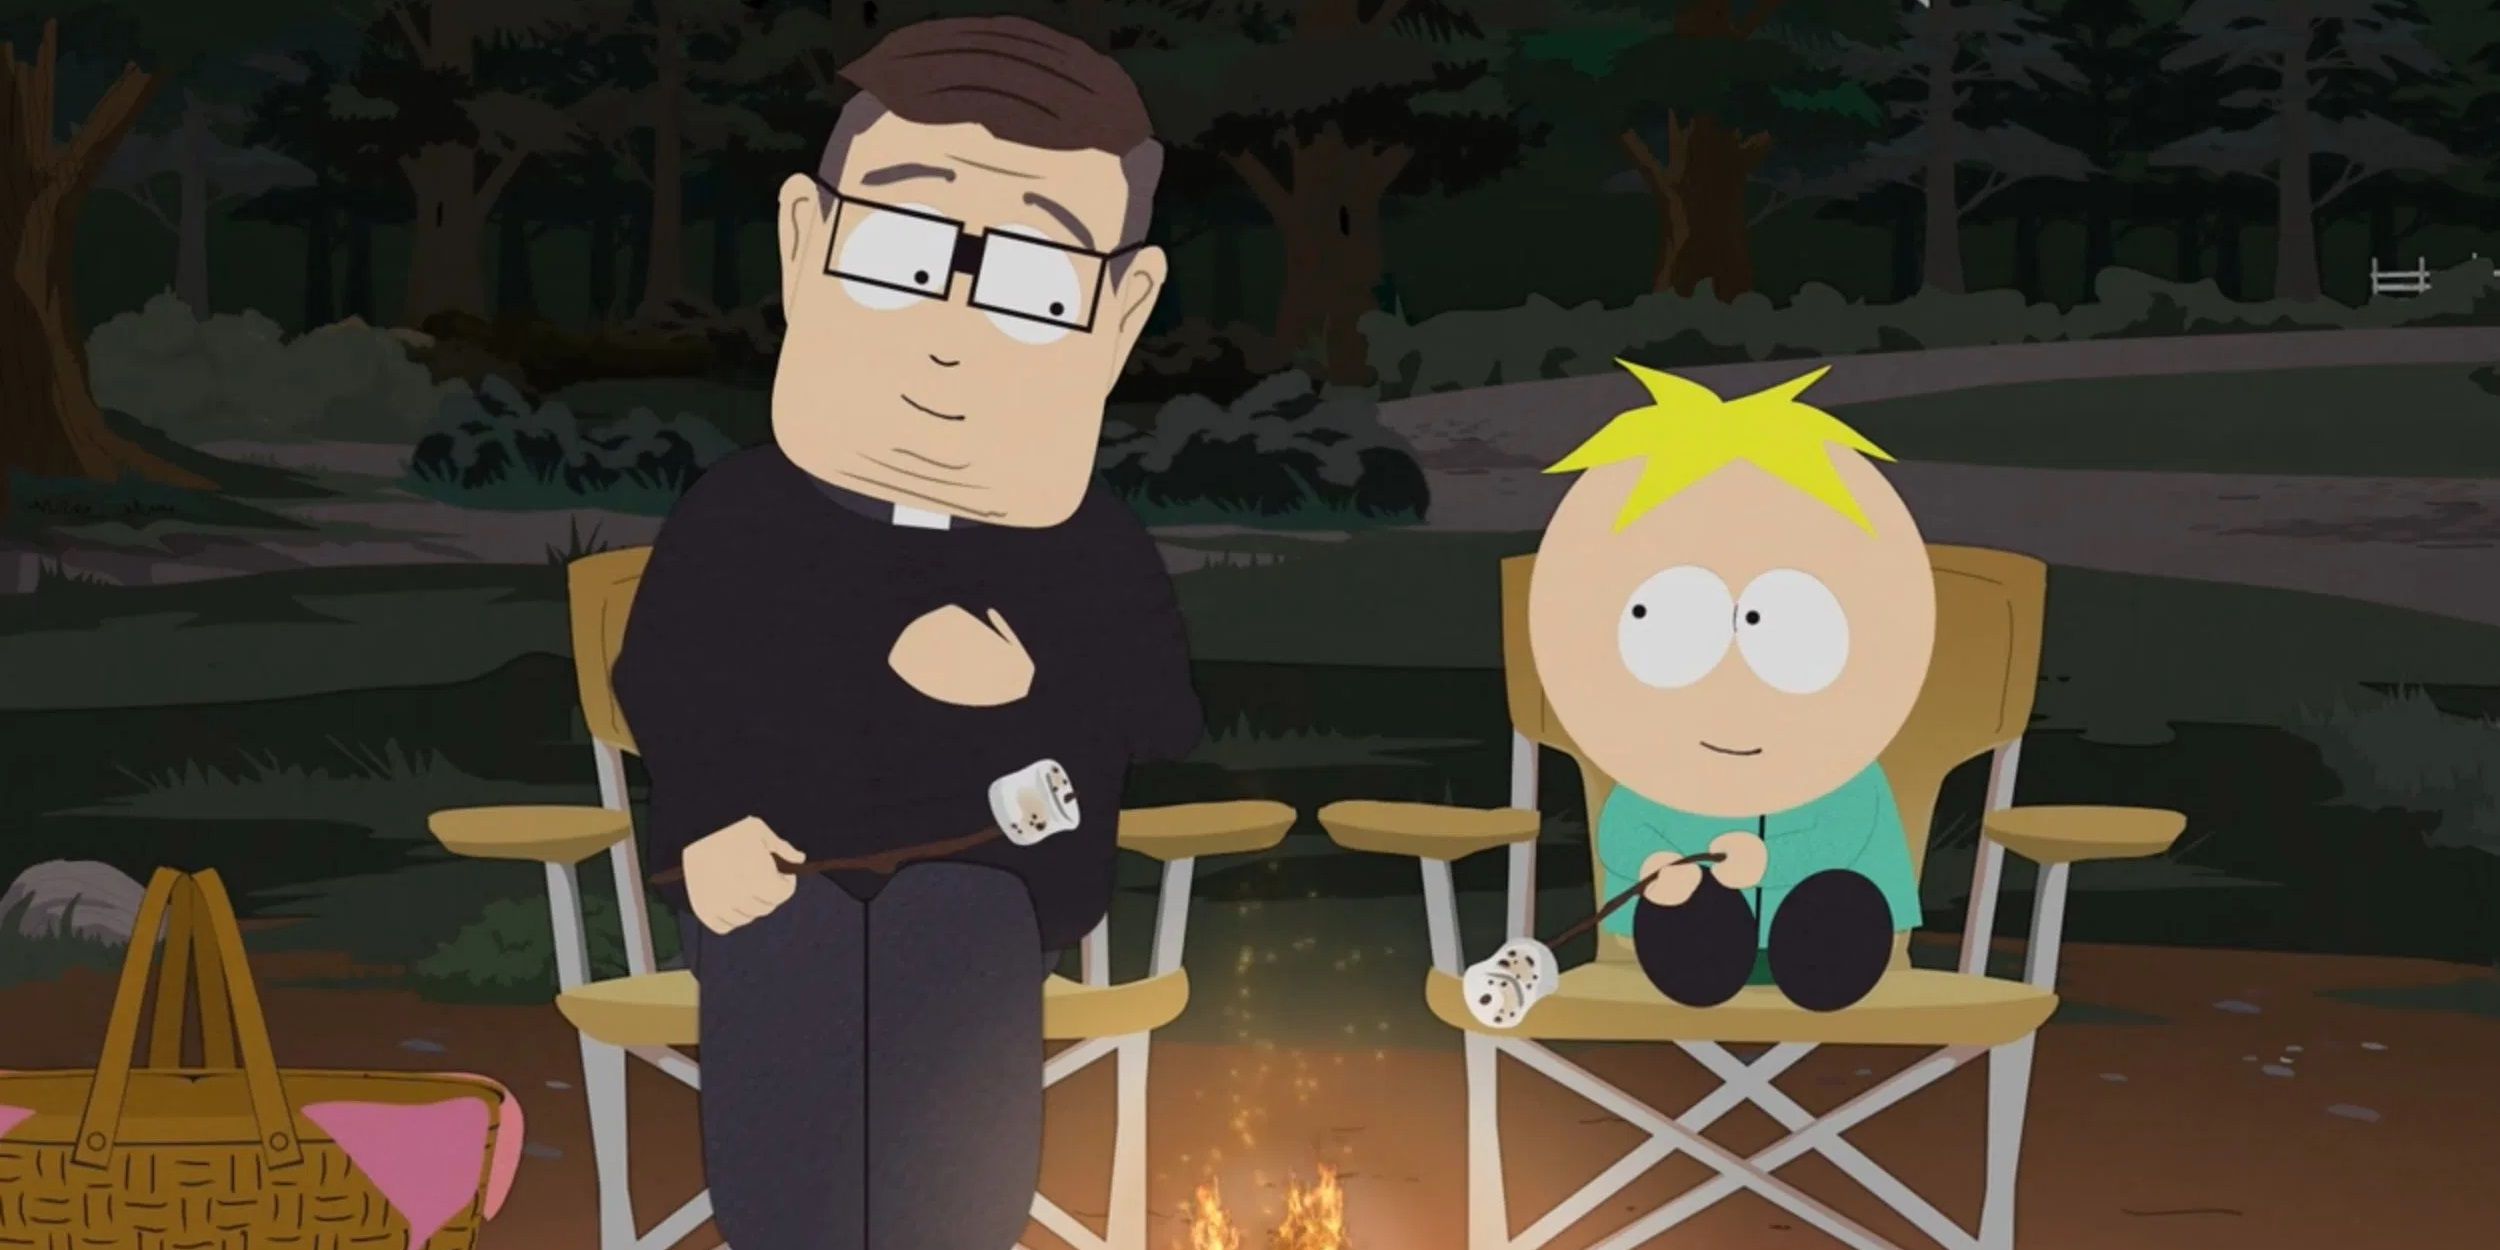 South Park 10 Best Episodes About Religion Ranked